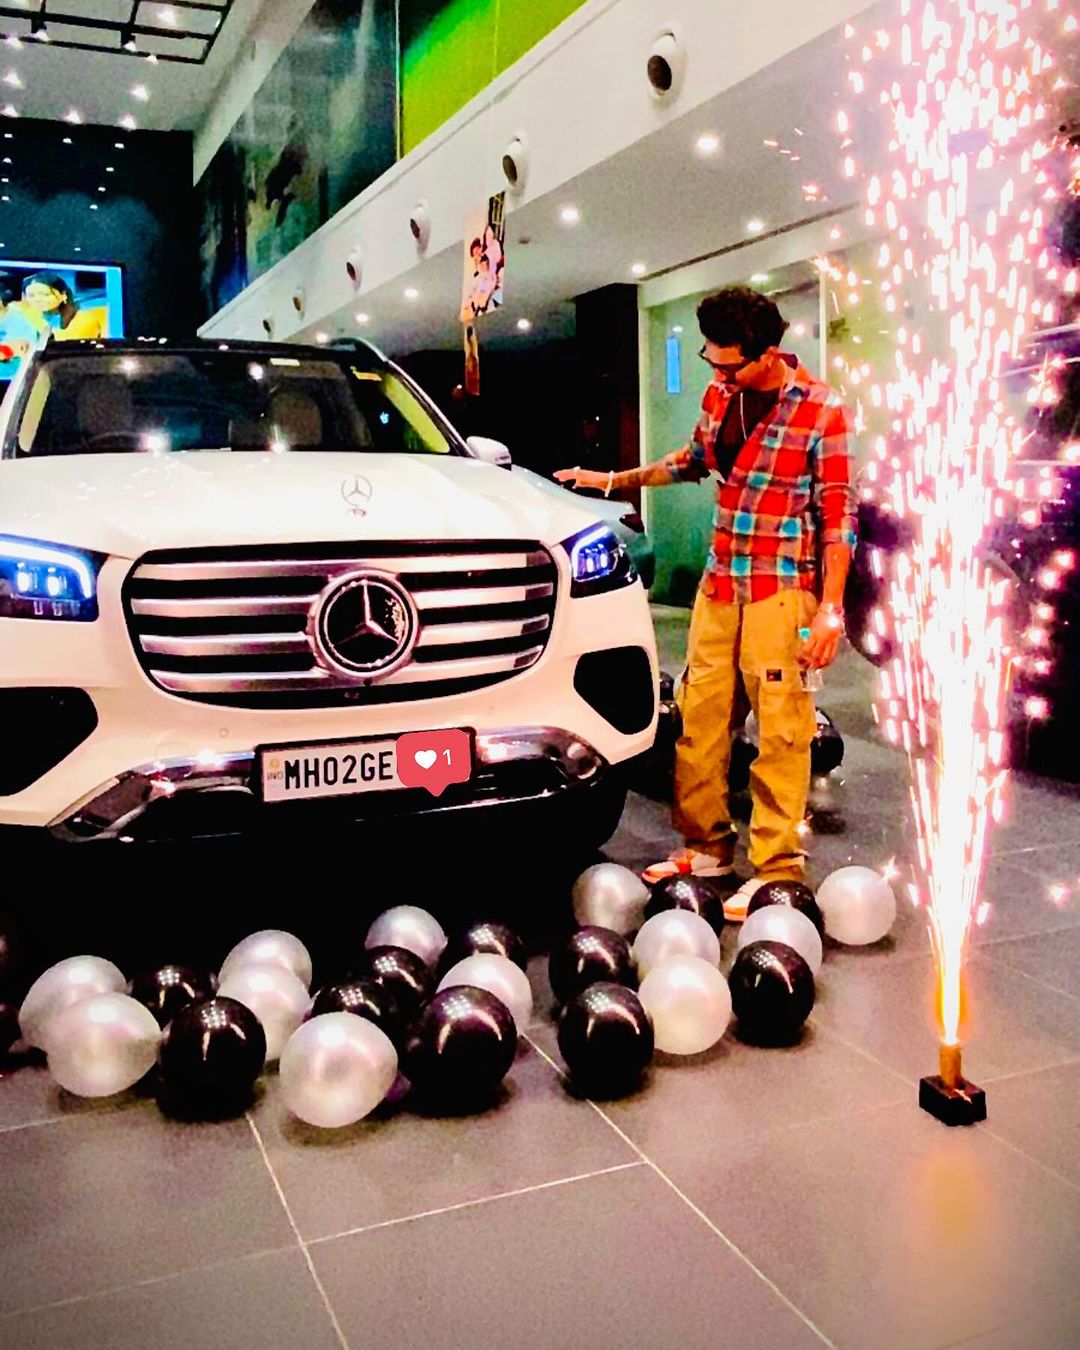 Haarsh Limbachiyaa And Bharti Singh Welcomes Brand New Luxurious Car To Their Home. Haarsh Says My New Car Is My Happy Place!